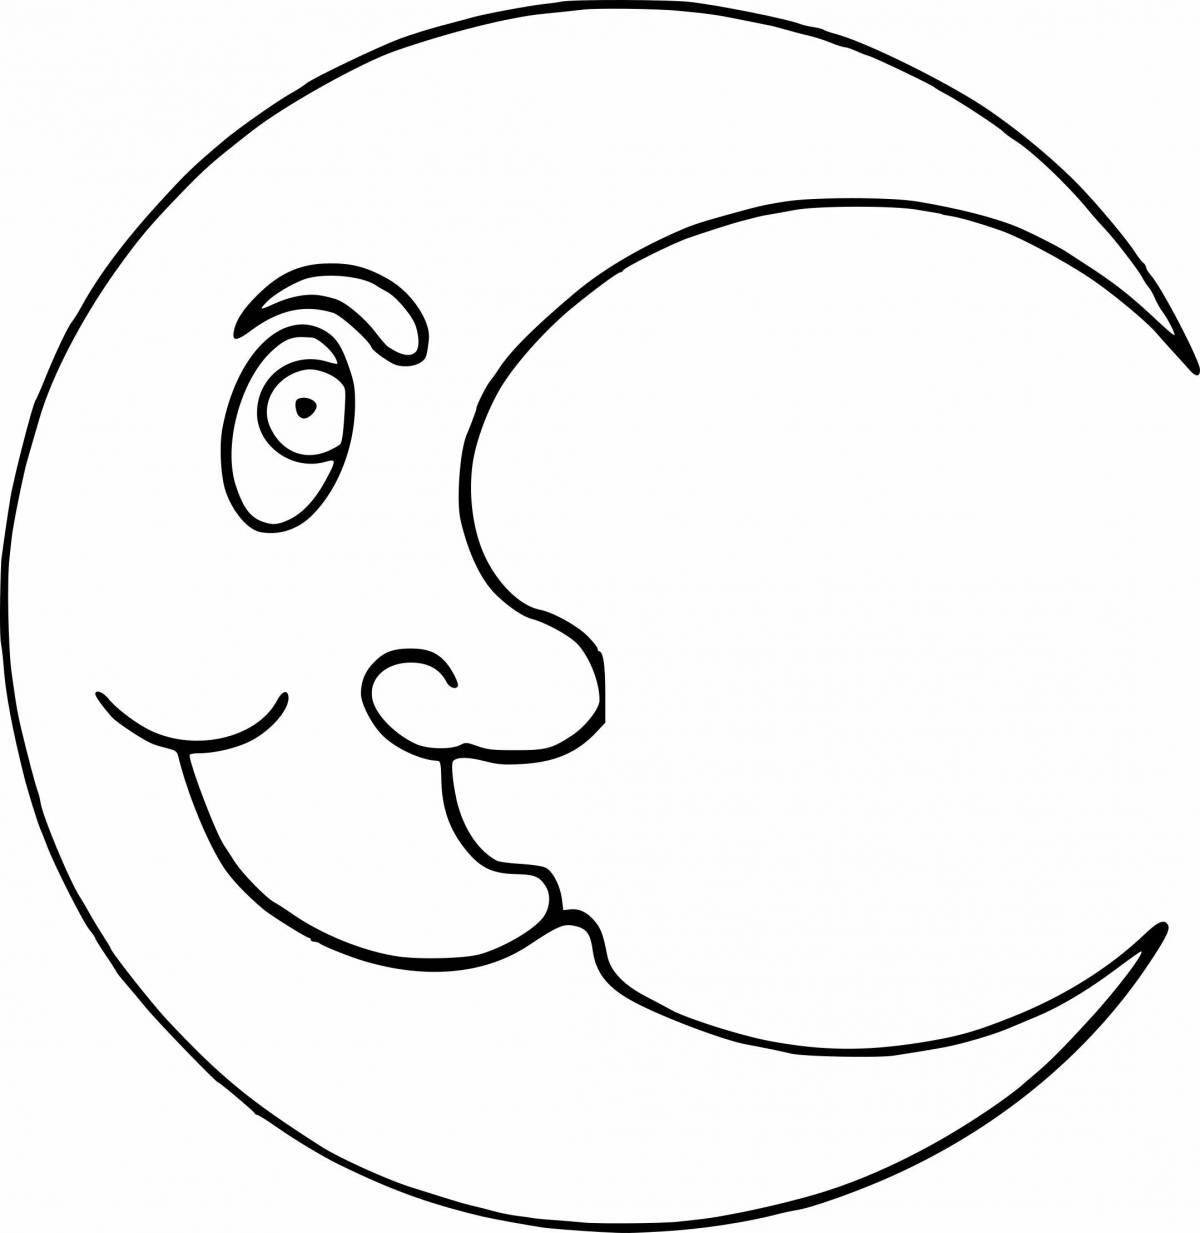 Playful moon coloring for kids